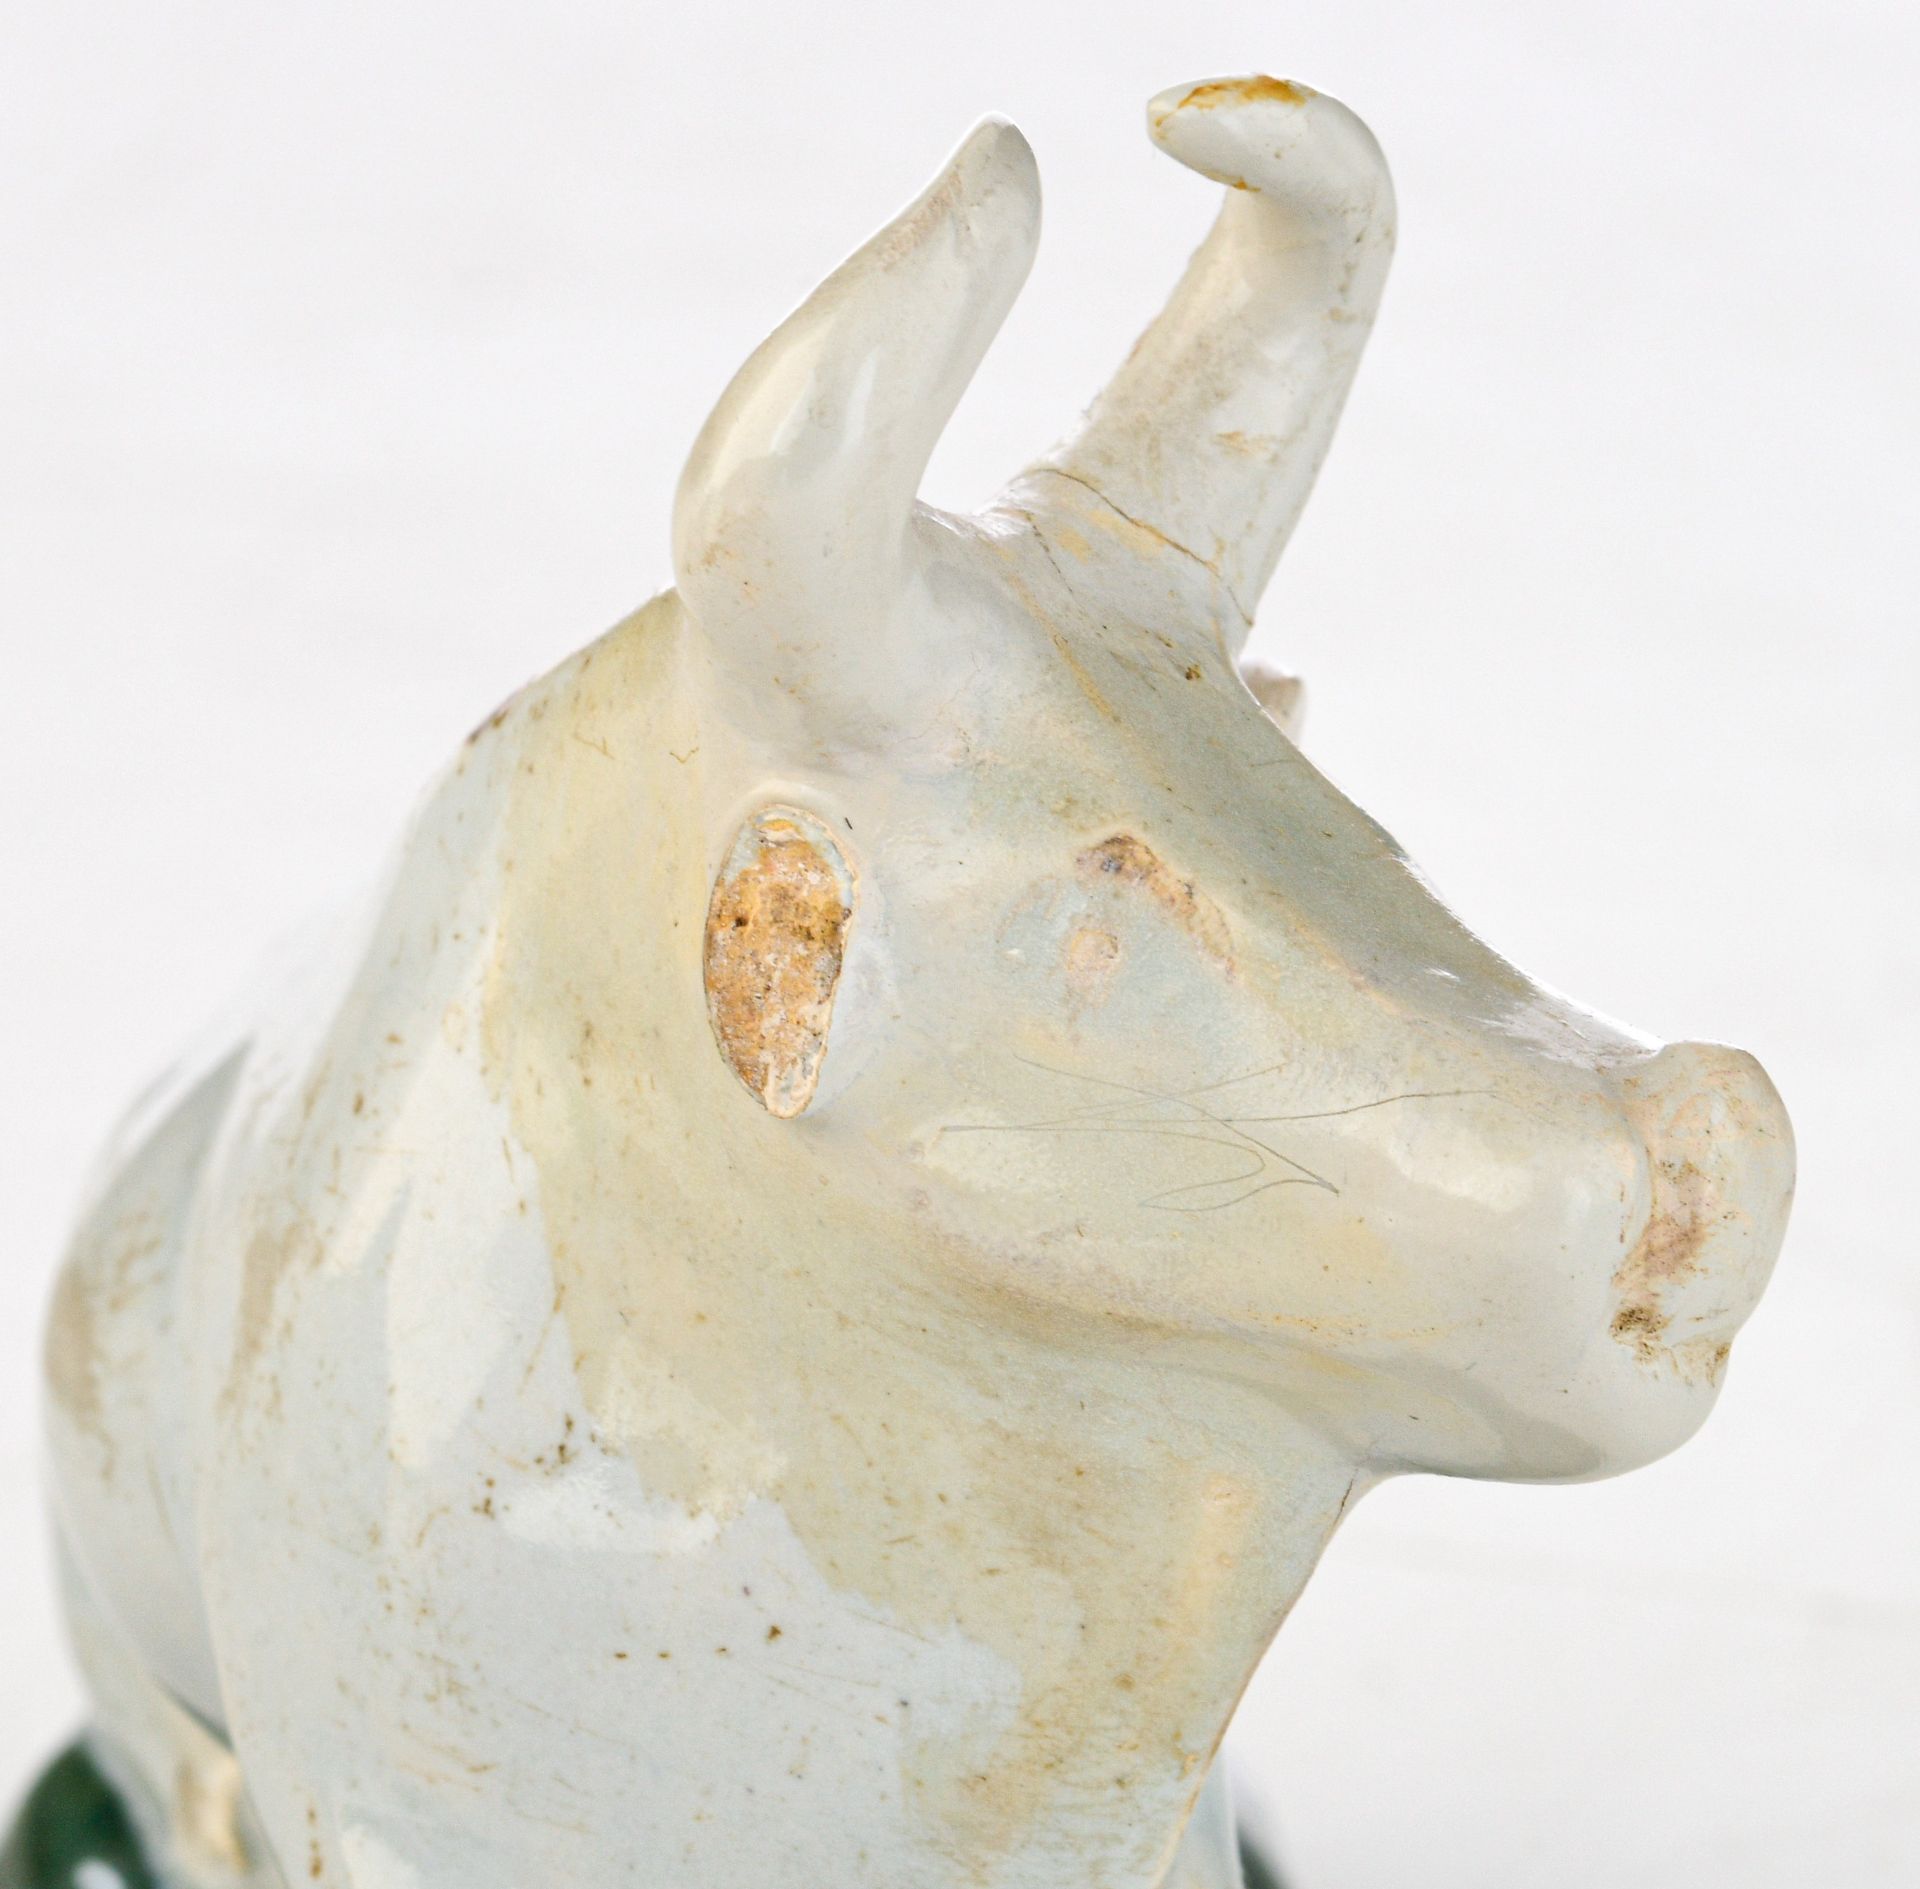 (BIDDING ONLY ON CARLOBONTE.BE) A rare pair of white Delft figures of cows, 18thC, marked Geertruy V - Image 11 of 16